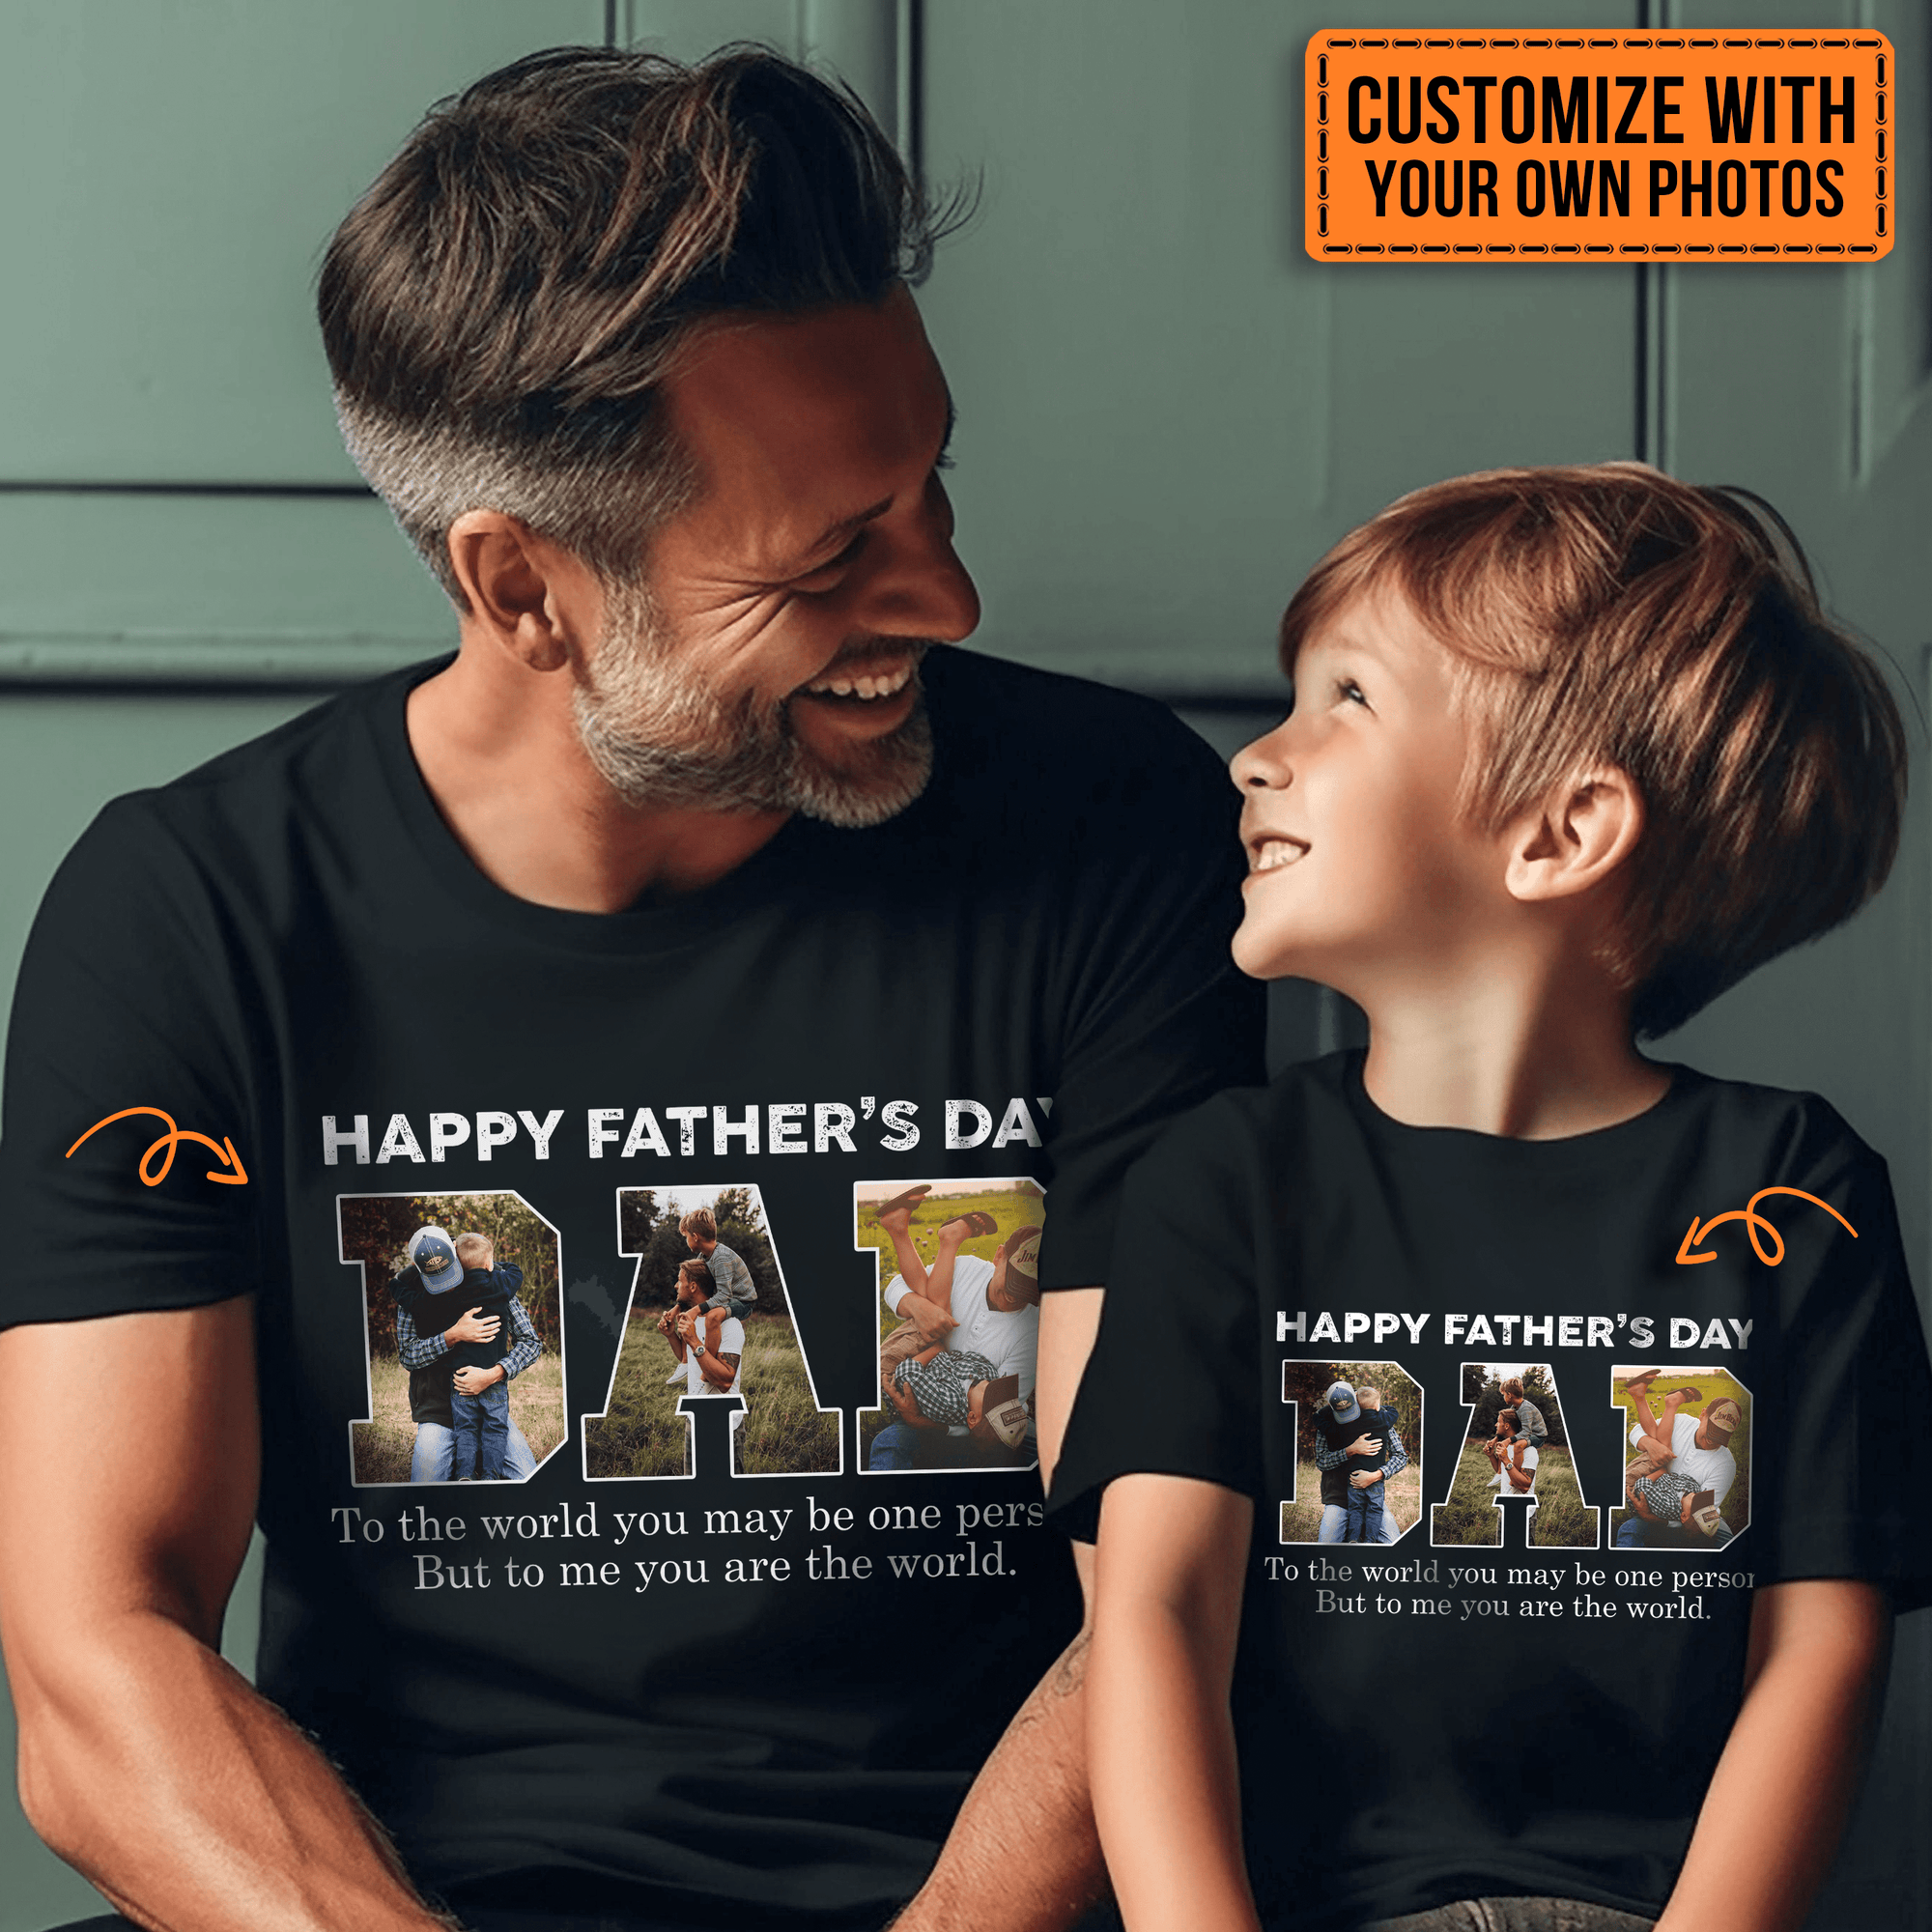 Custom Photo - Happy Fathers' Day. To Me You Are The World - Funny Fathers Day Personalized Custom T Shirt - Birthday, Loving, Funny Gift for Grandfather/Dad/Father, Husband, Grandparent - Suzitee Store